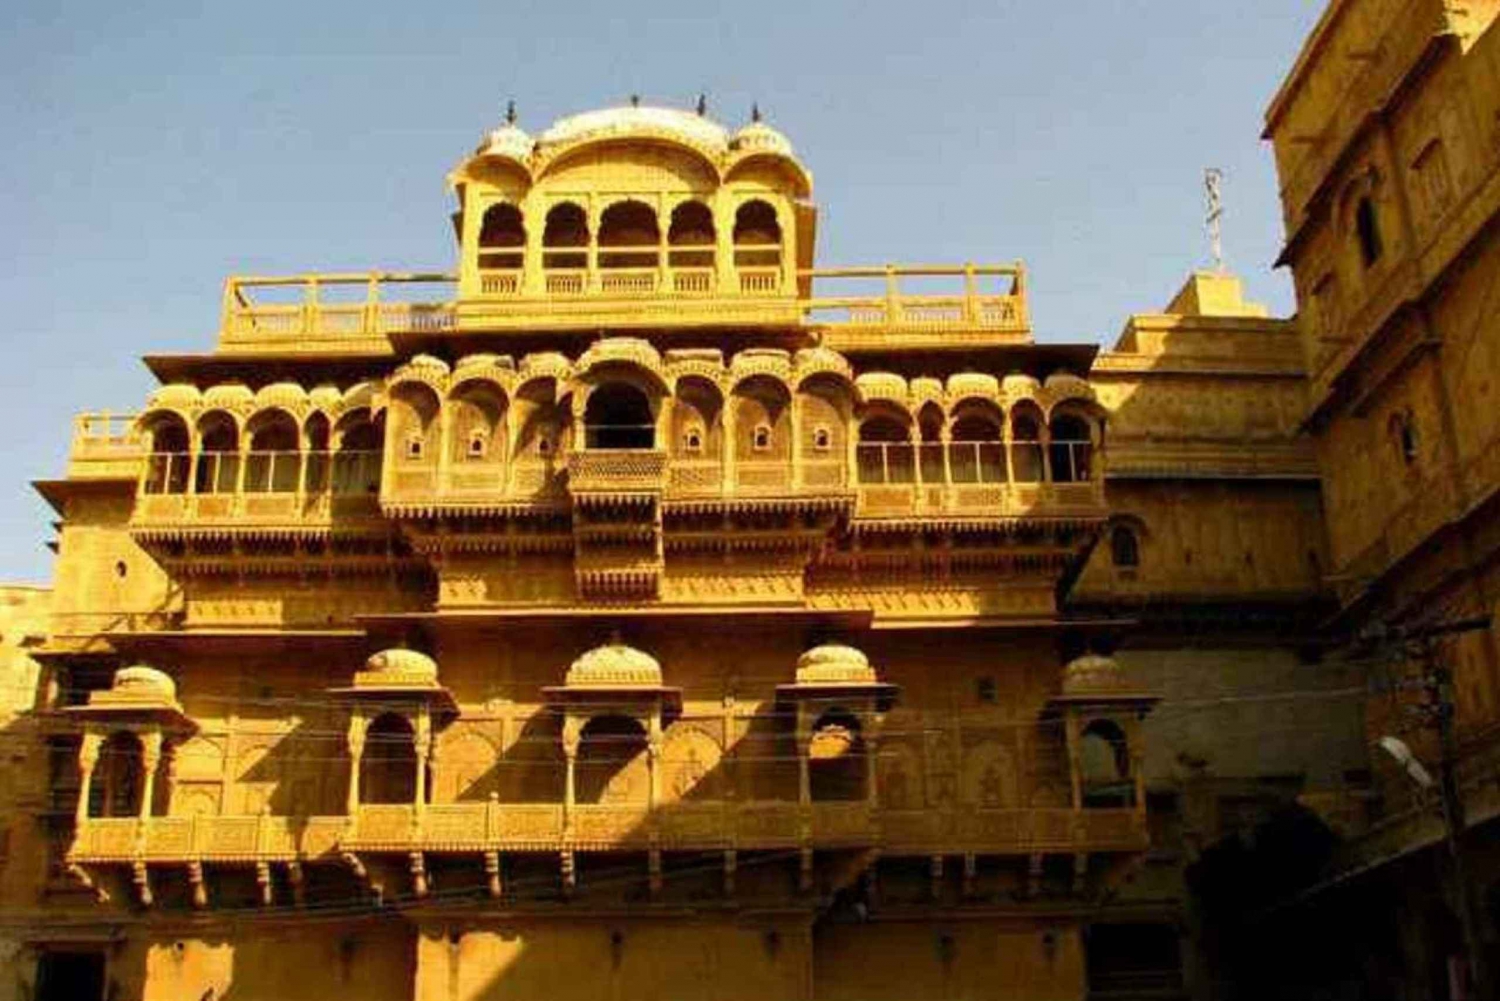 Jaisalmer City Sightseeing With Transport & Tour Guide